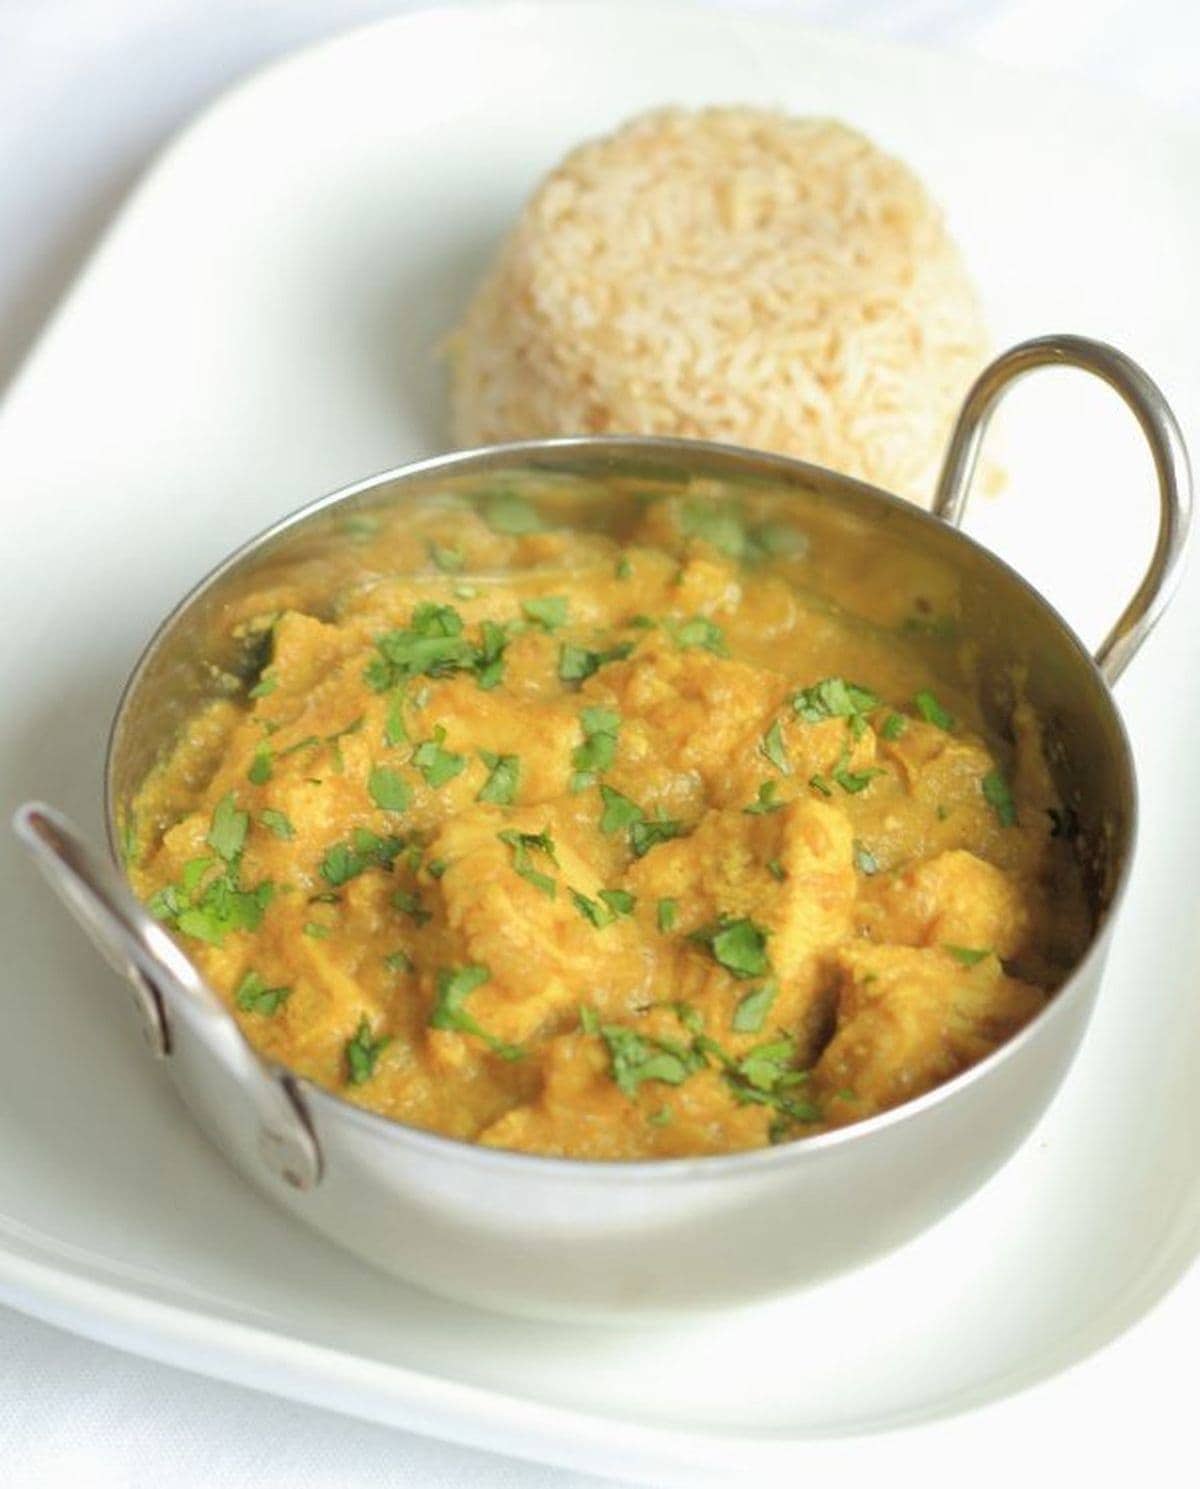 A balti dish of lighter chicken korma on a serving plate with a portion of wholegrain rice in the background.